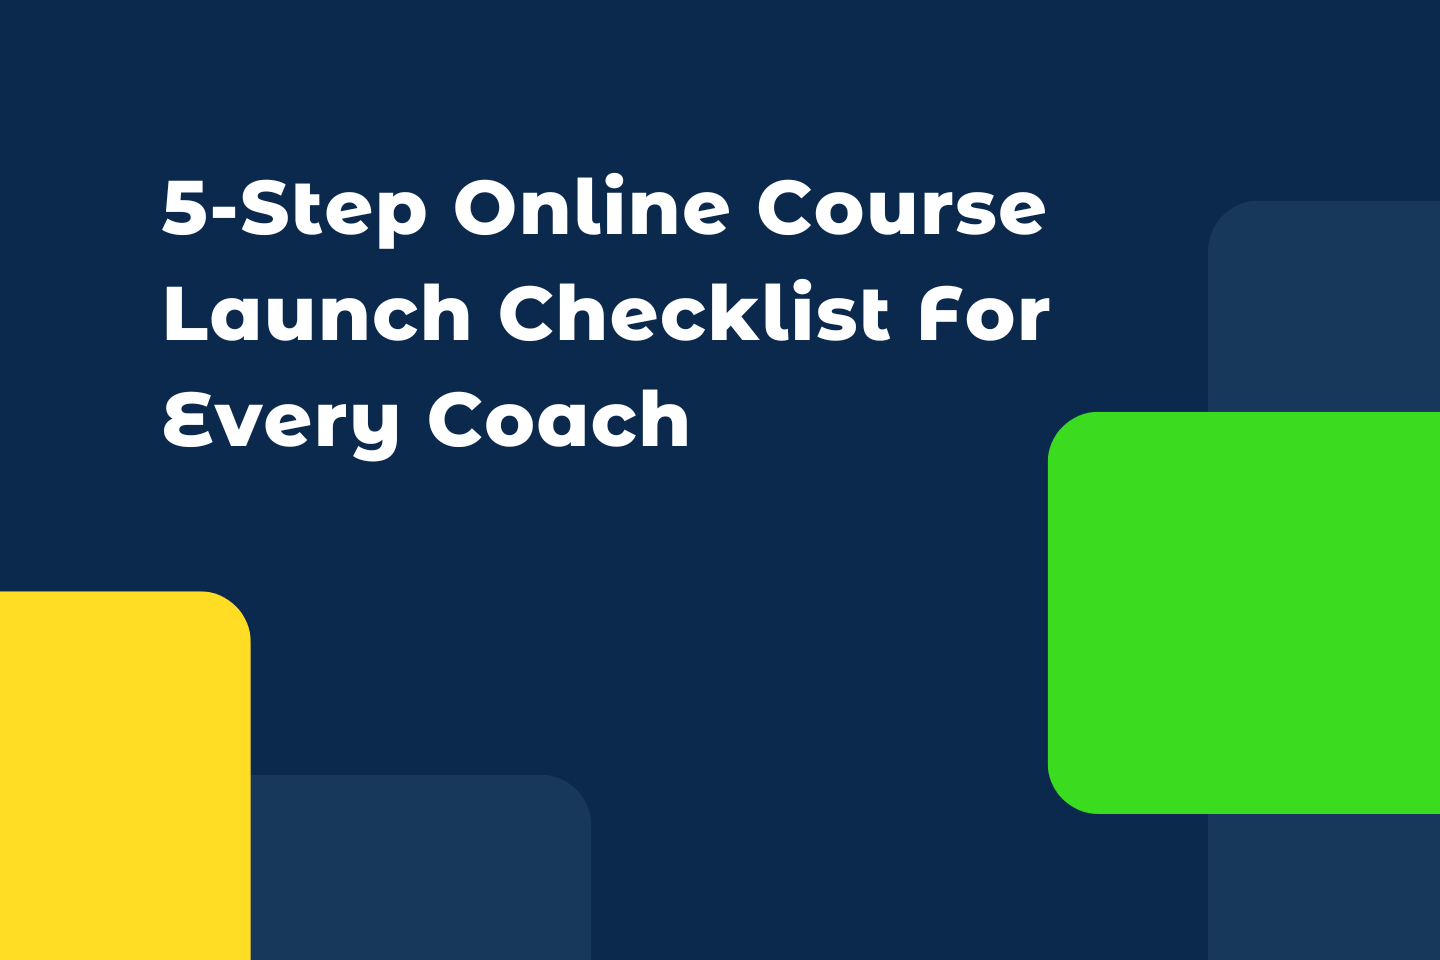 5-Step Online Course Launch Checklist For Every Coach